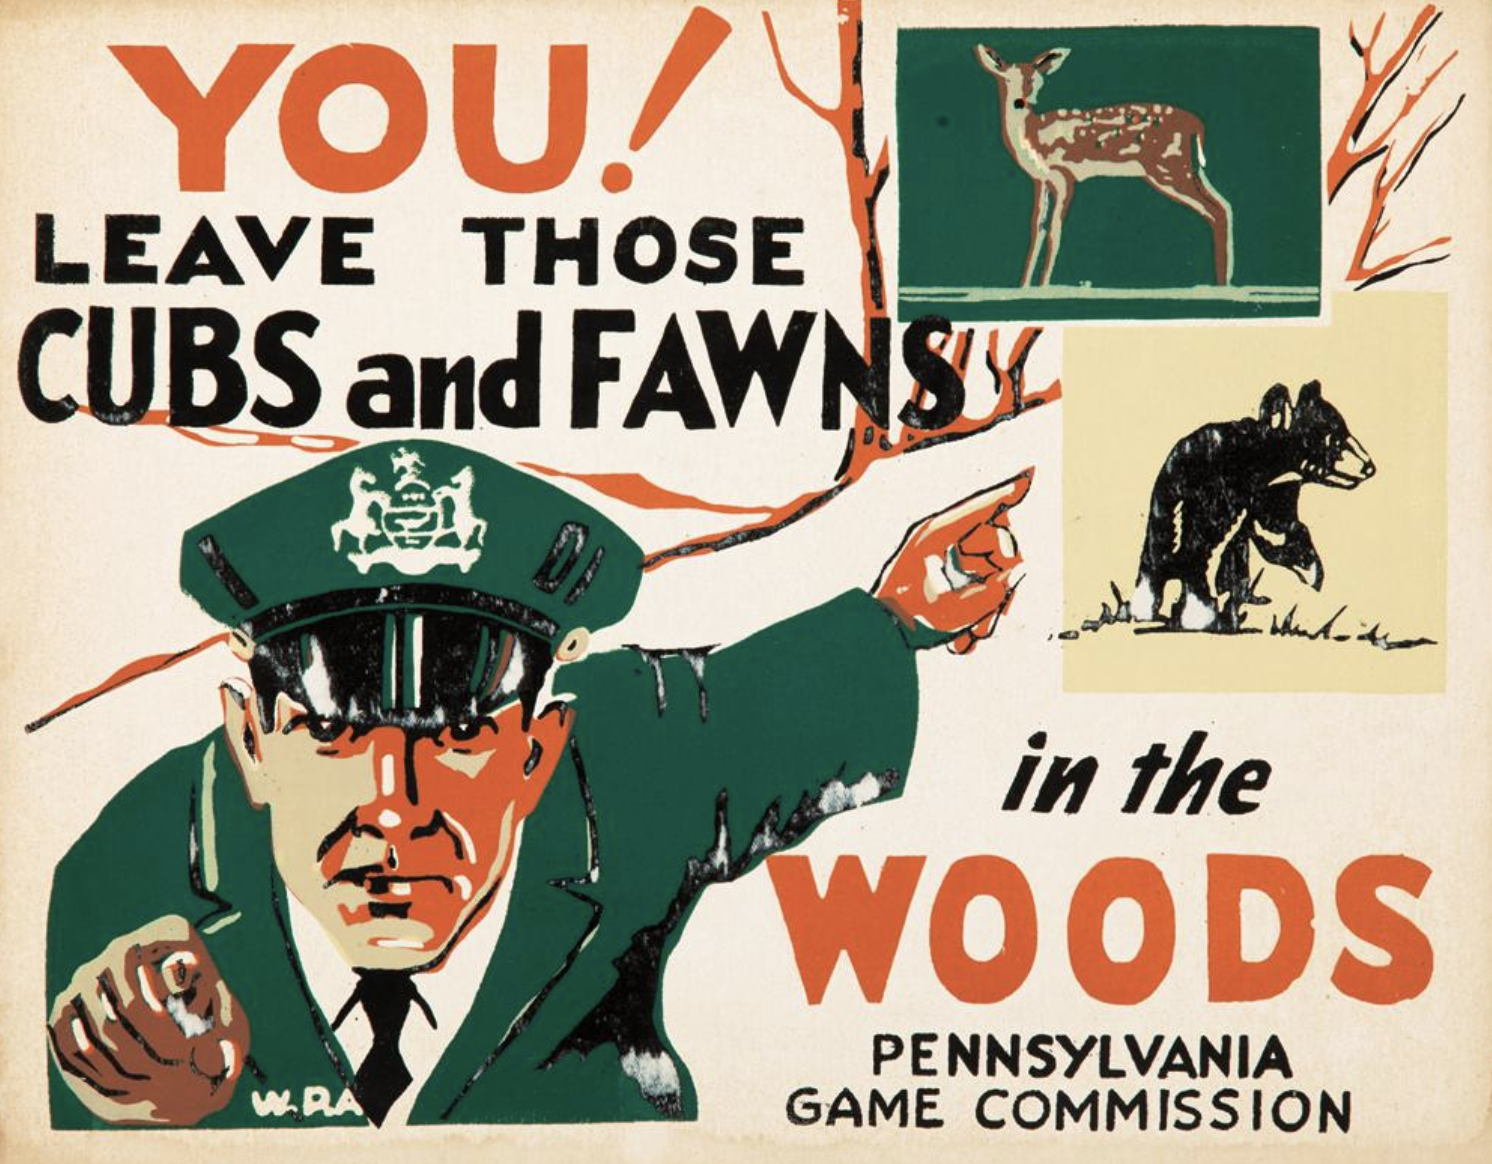 illustrational poster of an officer pointing at illustrations of cubs and fawns